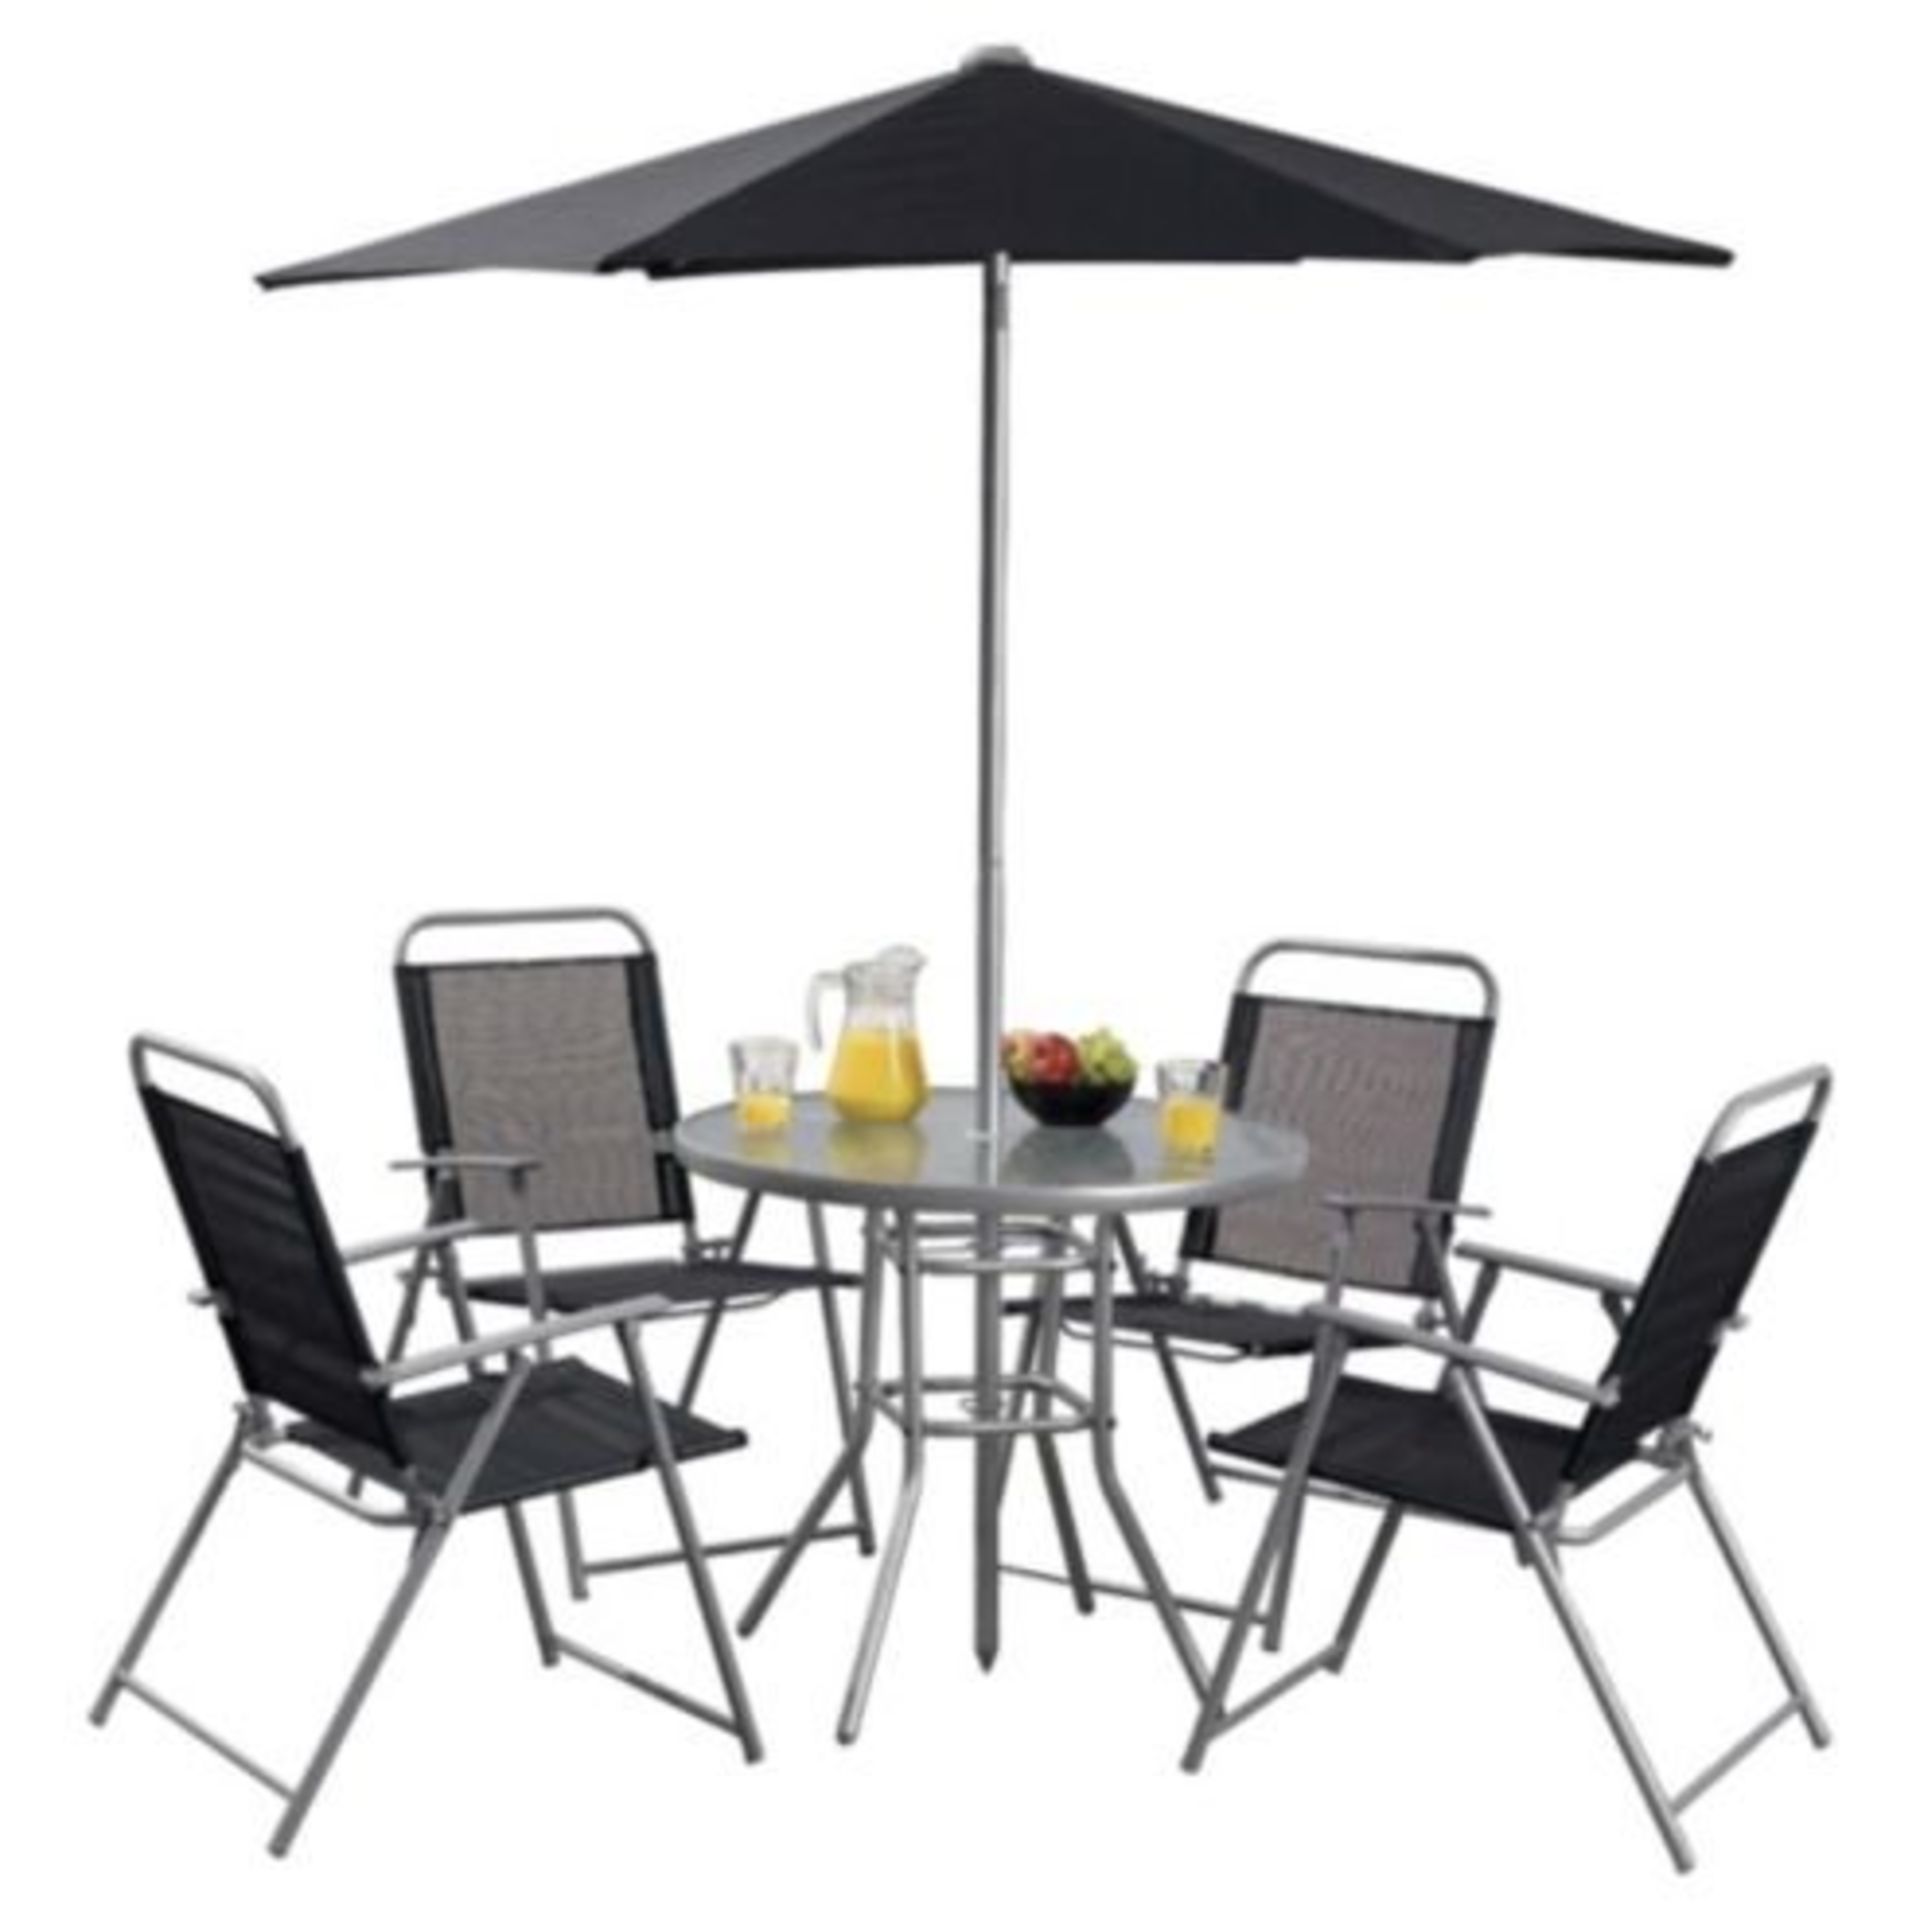 V Brand New 6 Piece Garden Furniture Set Inlcudes Glass Top Table - Four Folding and Reclining